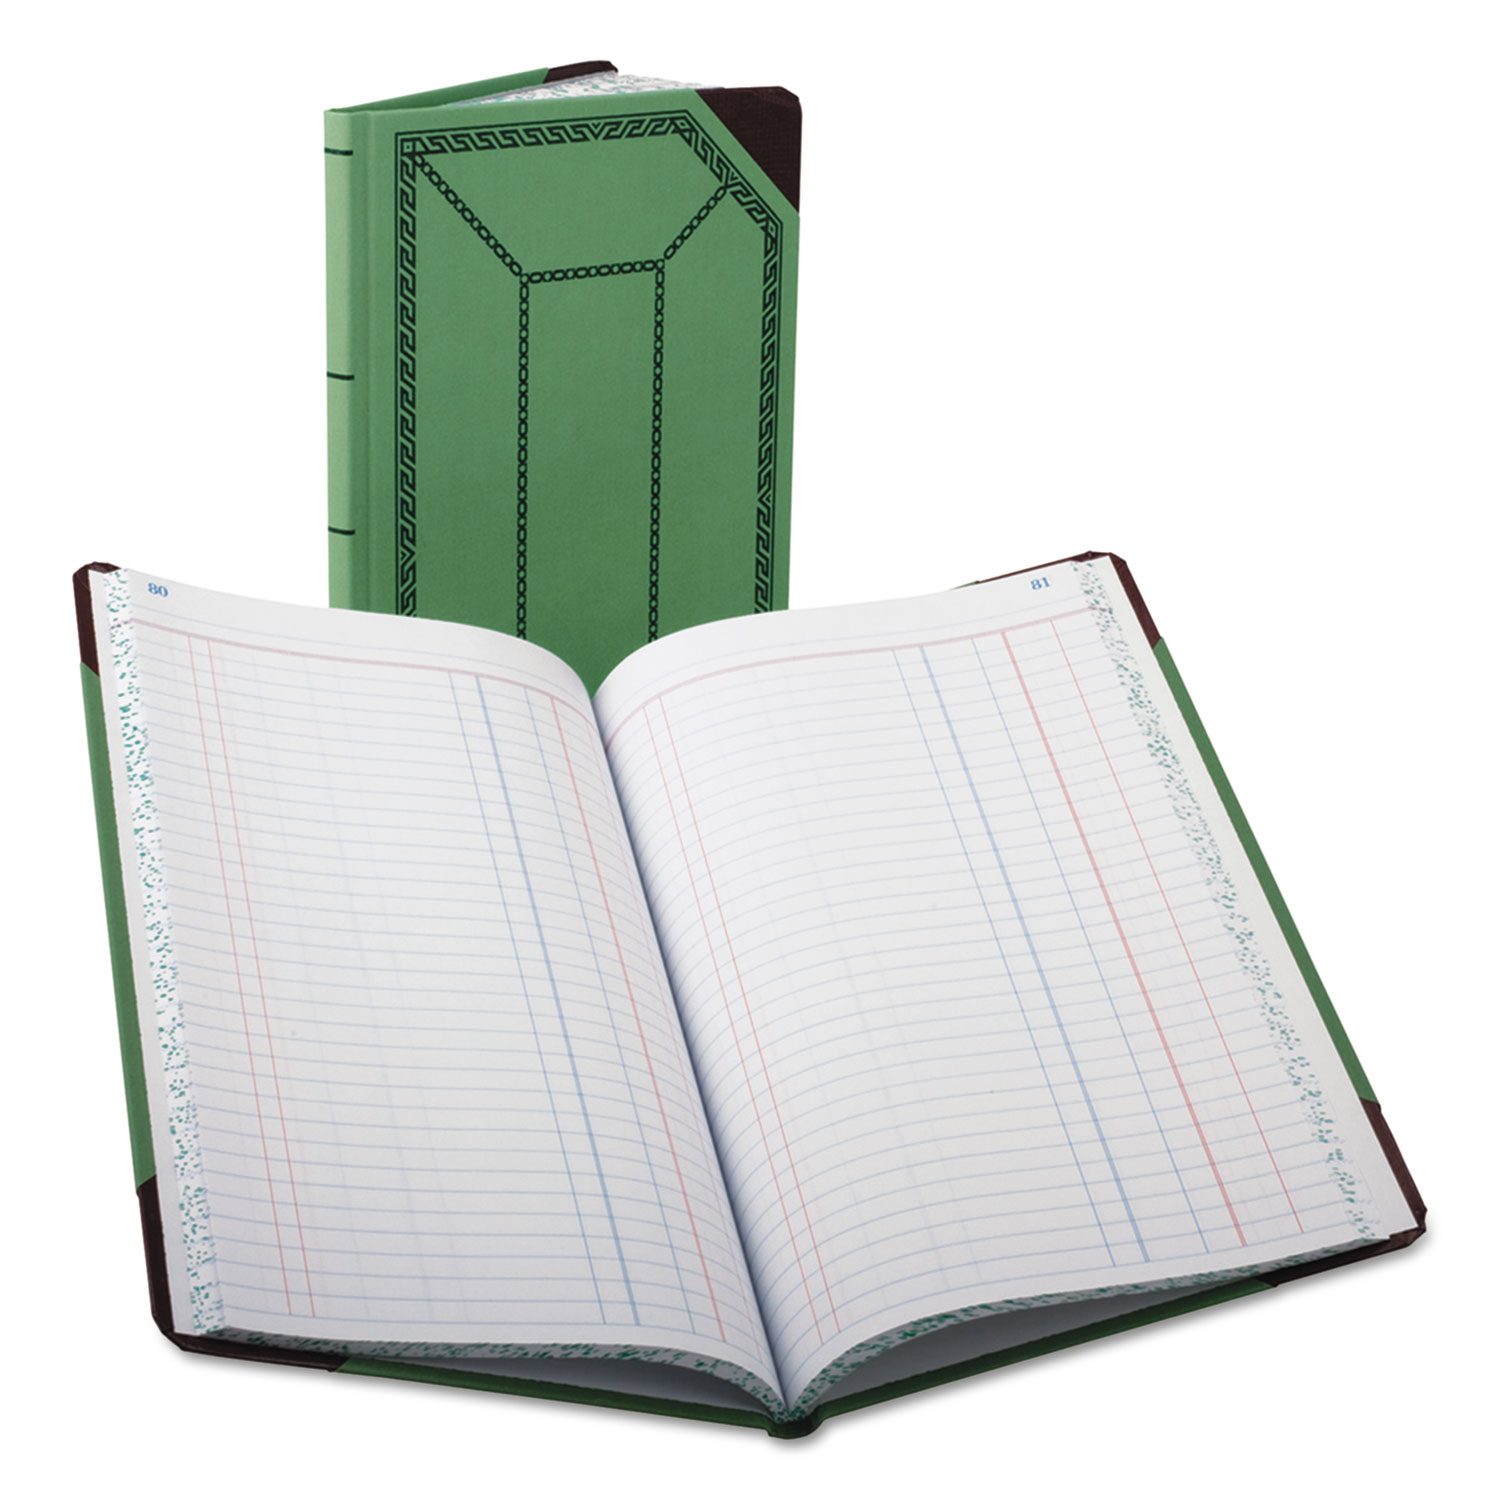  Boorum & Pease 67 1/8-150-J Record/Account Book, Journal Rule, Green/Red, 150 Pages, 12 1/2 x 7 5/8 (BOR6718150J) 